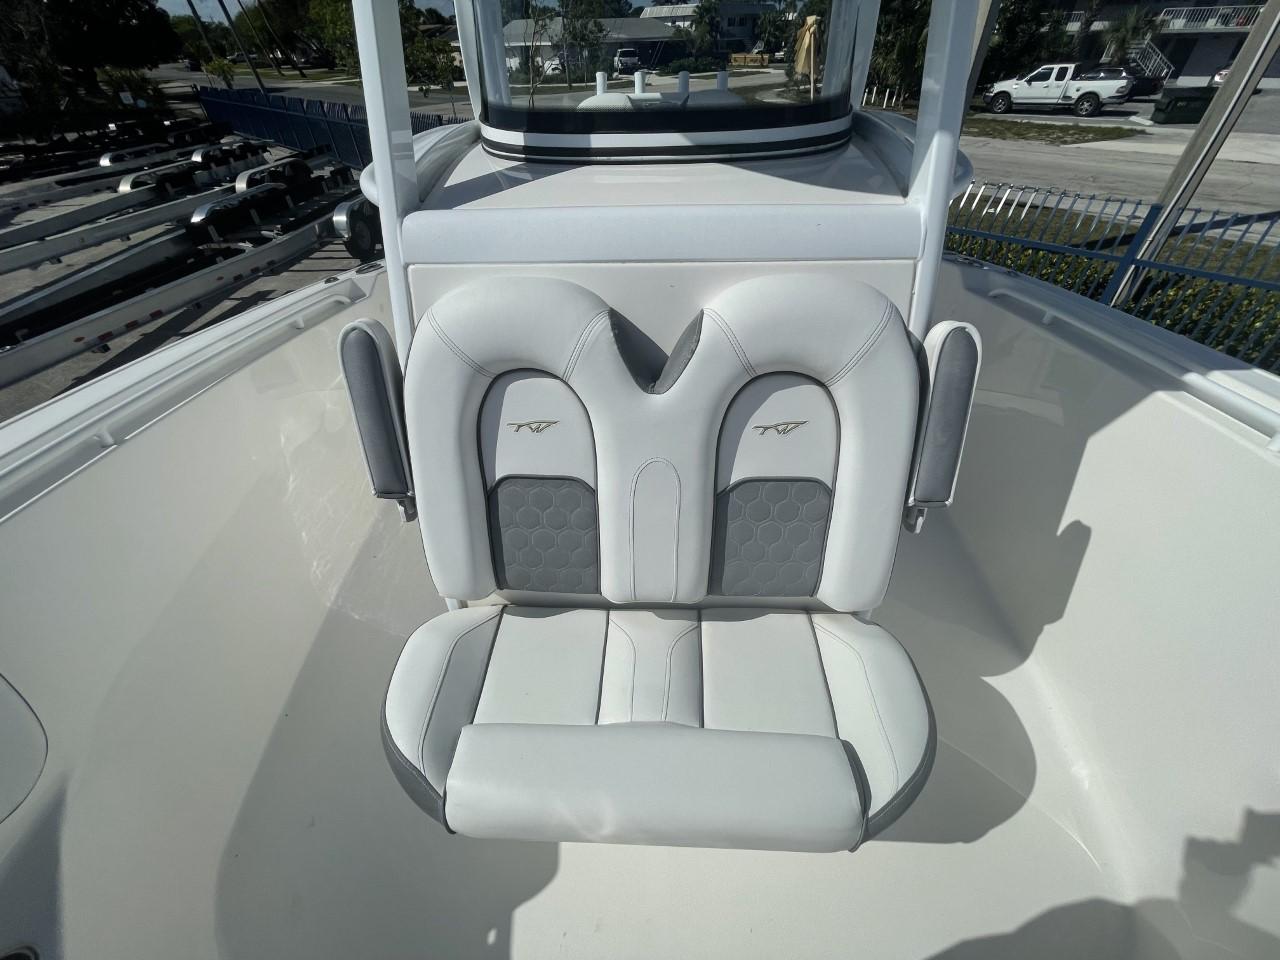 2018 Tidewater 28 280CC - console seating